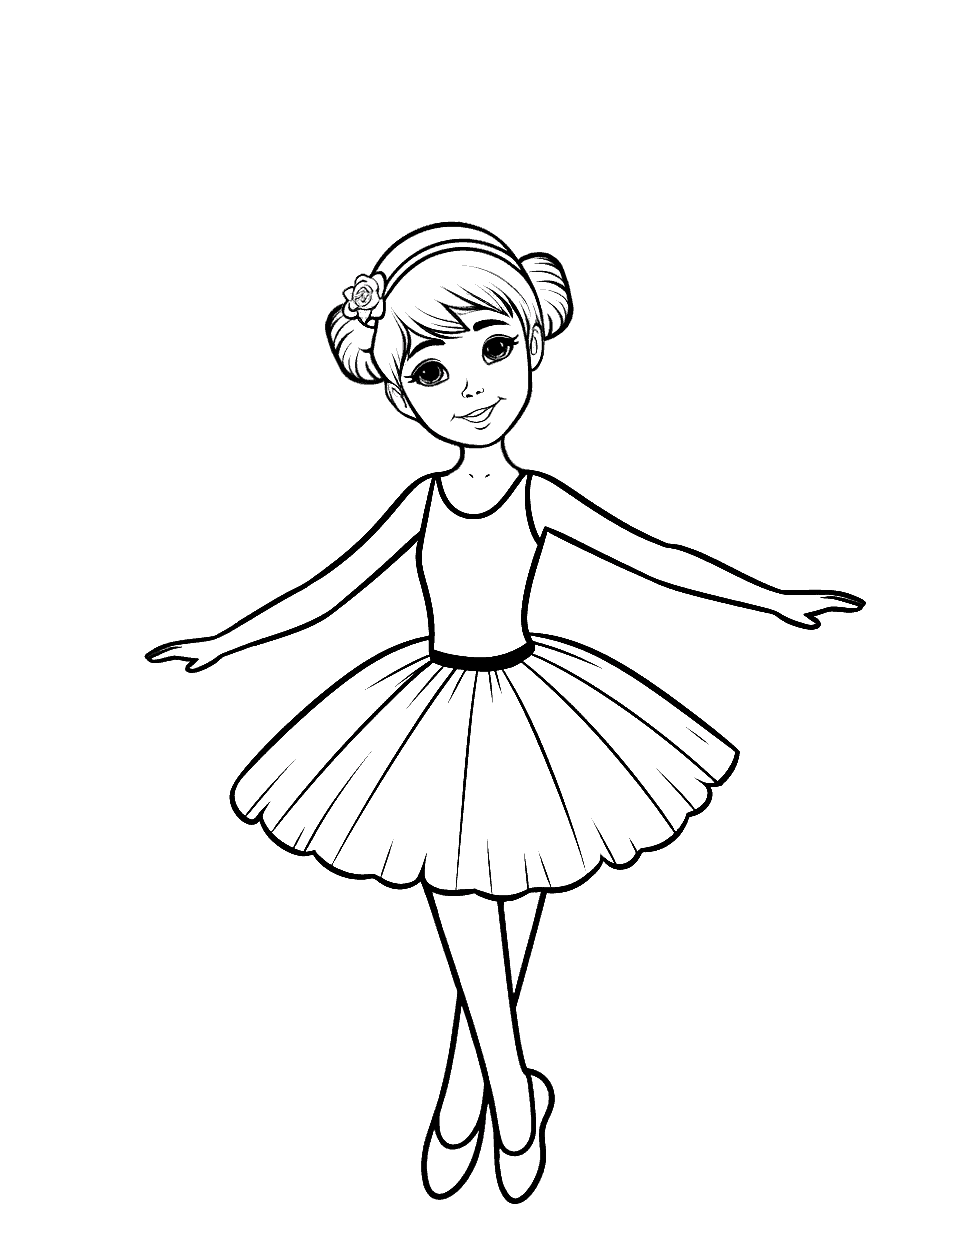 Barbie Ballerina Coloring Page - A coloring scene featuring a Barbie-like ballerina.